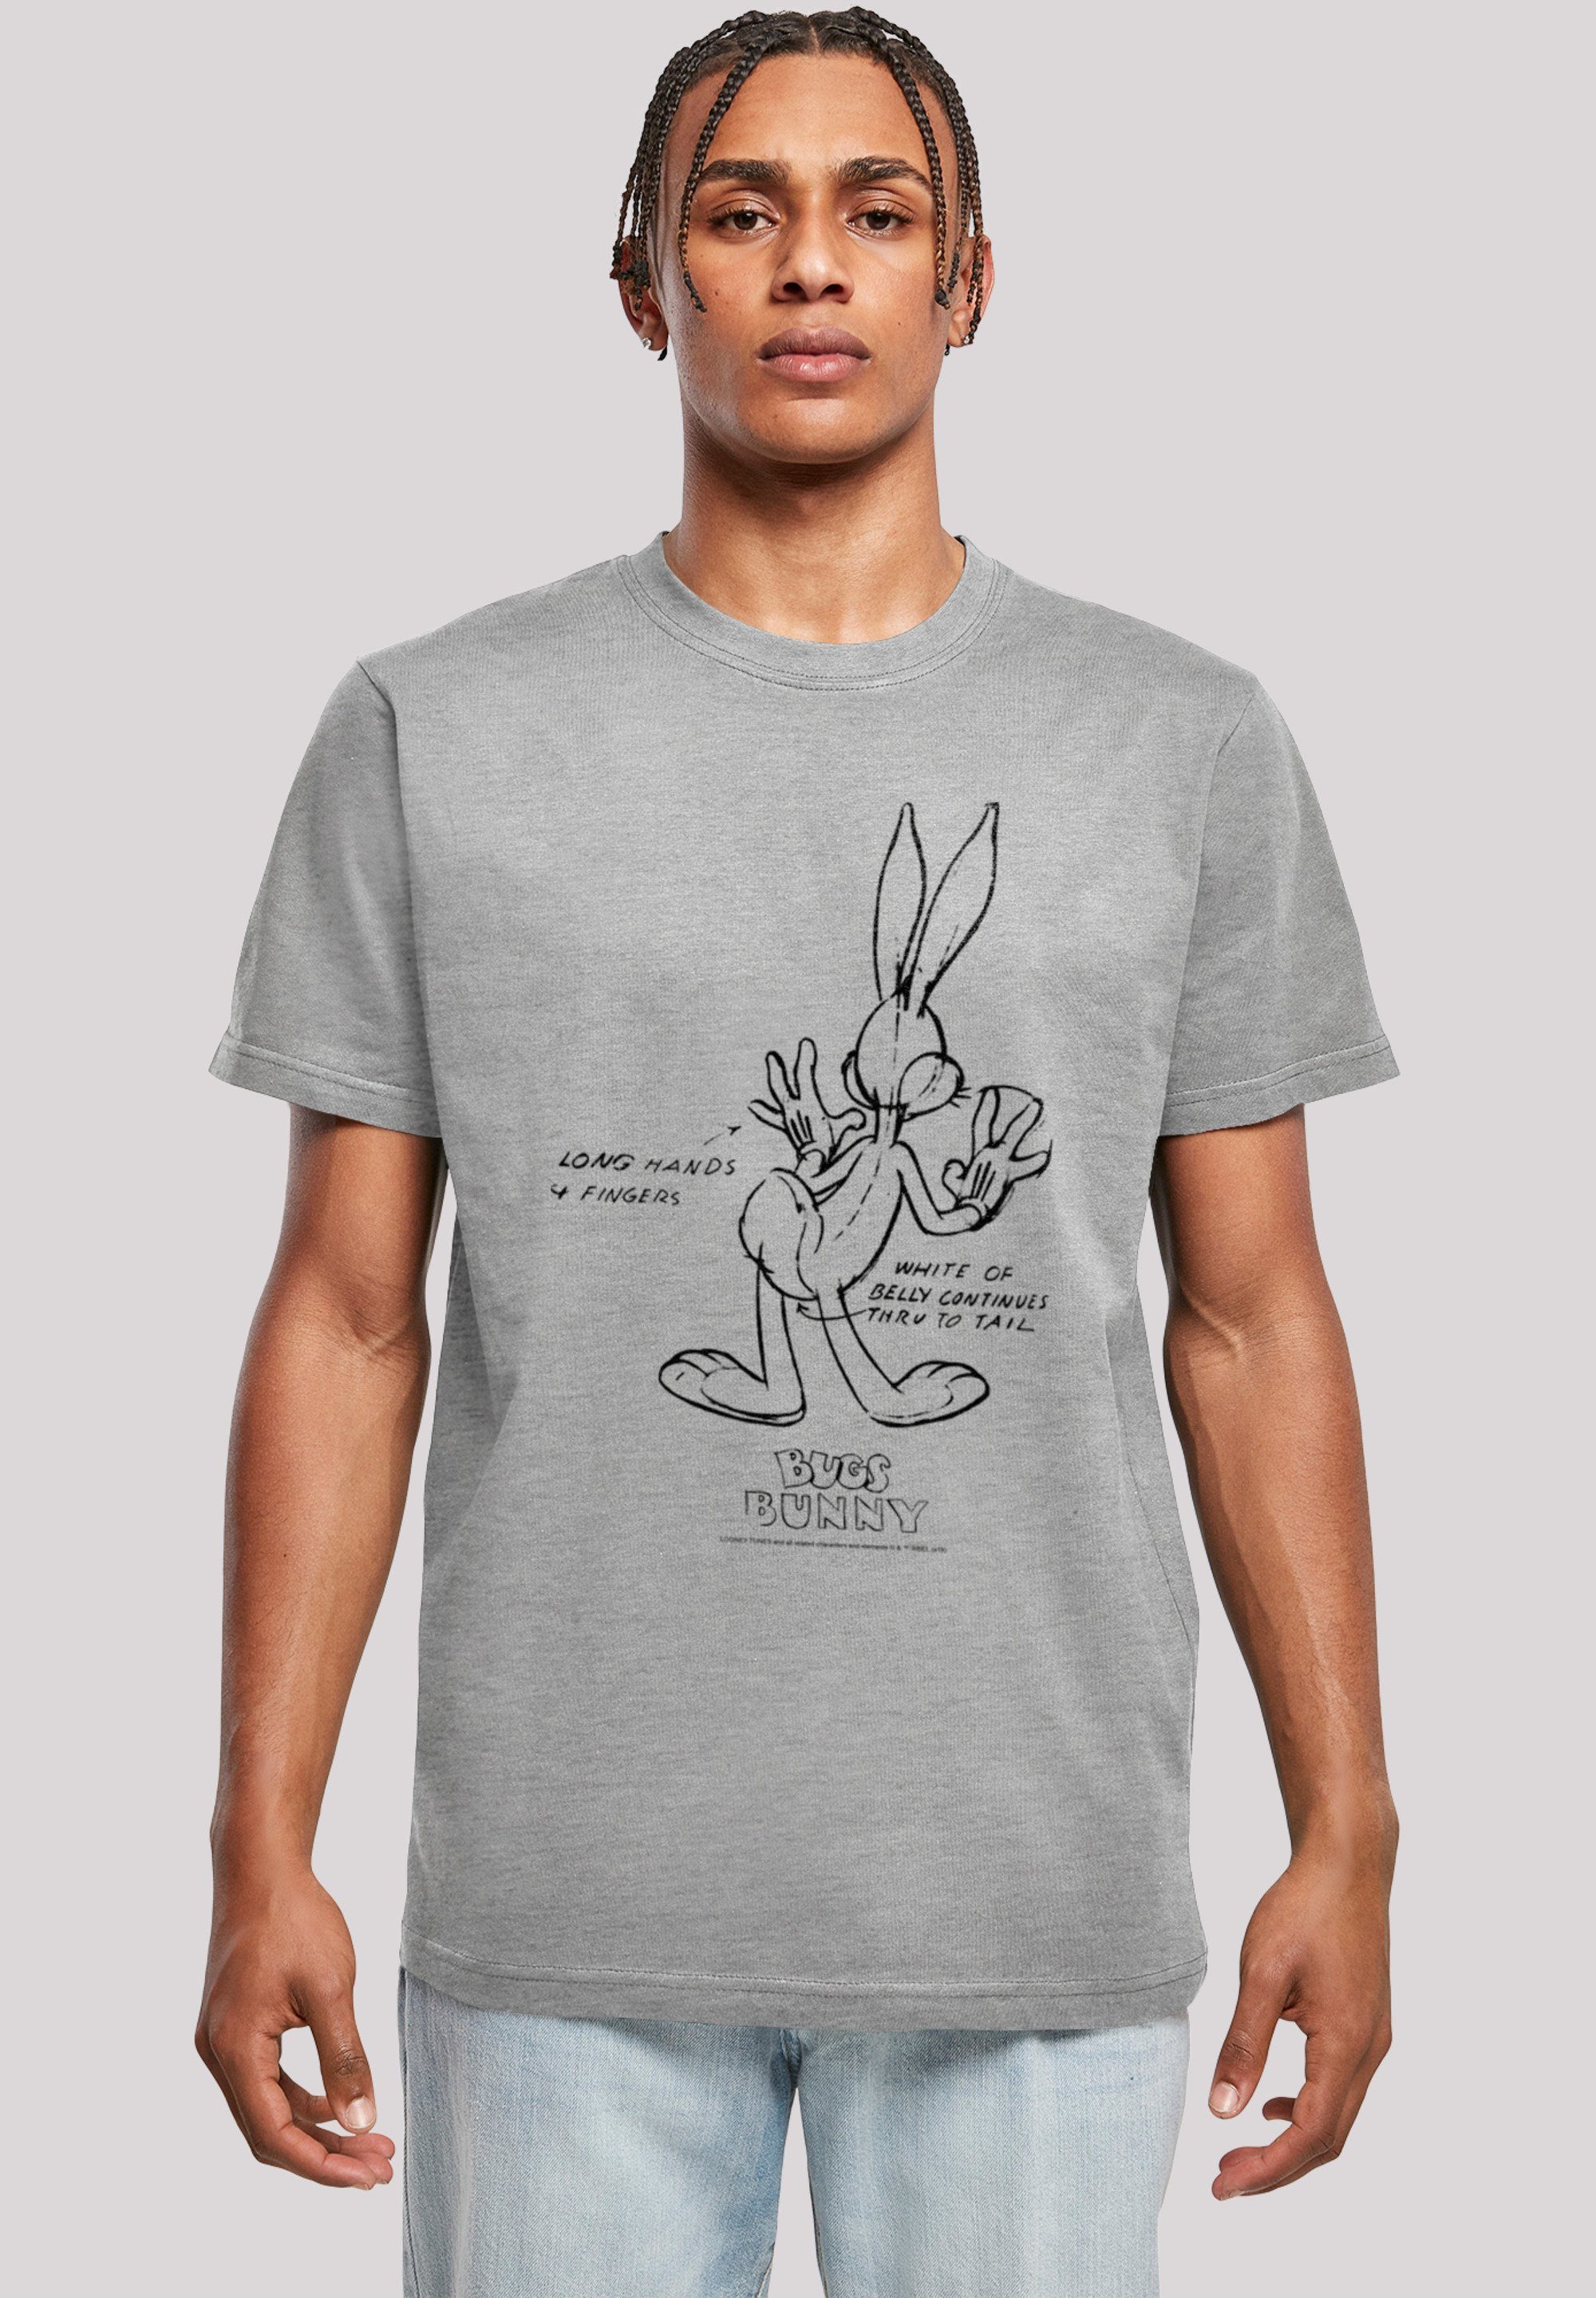 F4NT4STIC T-Shirt Looney Tunes Bugs Bunny White Belly Print heather grey